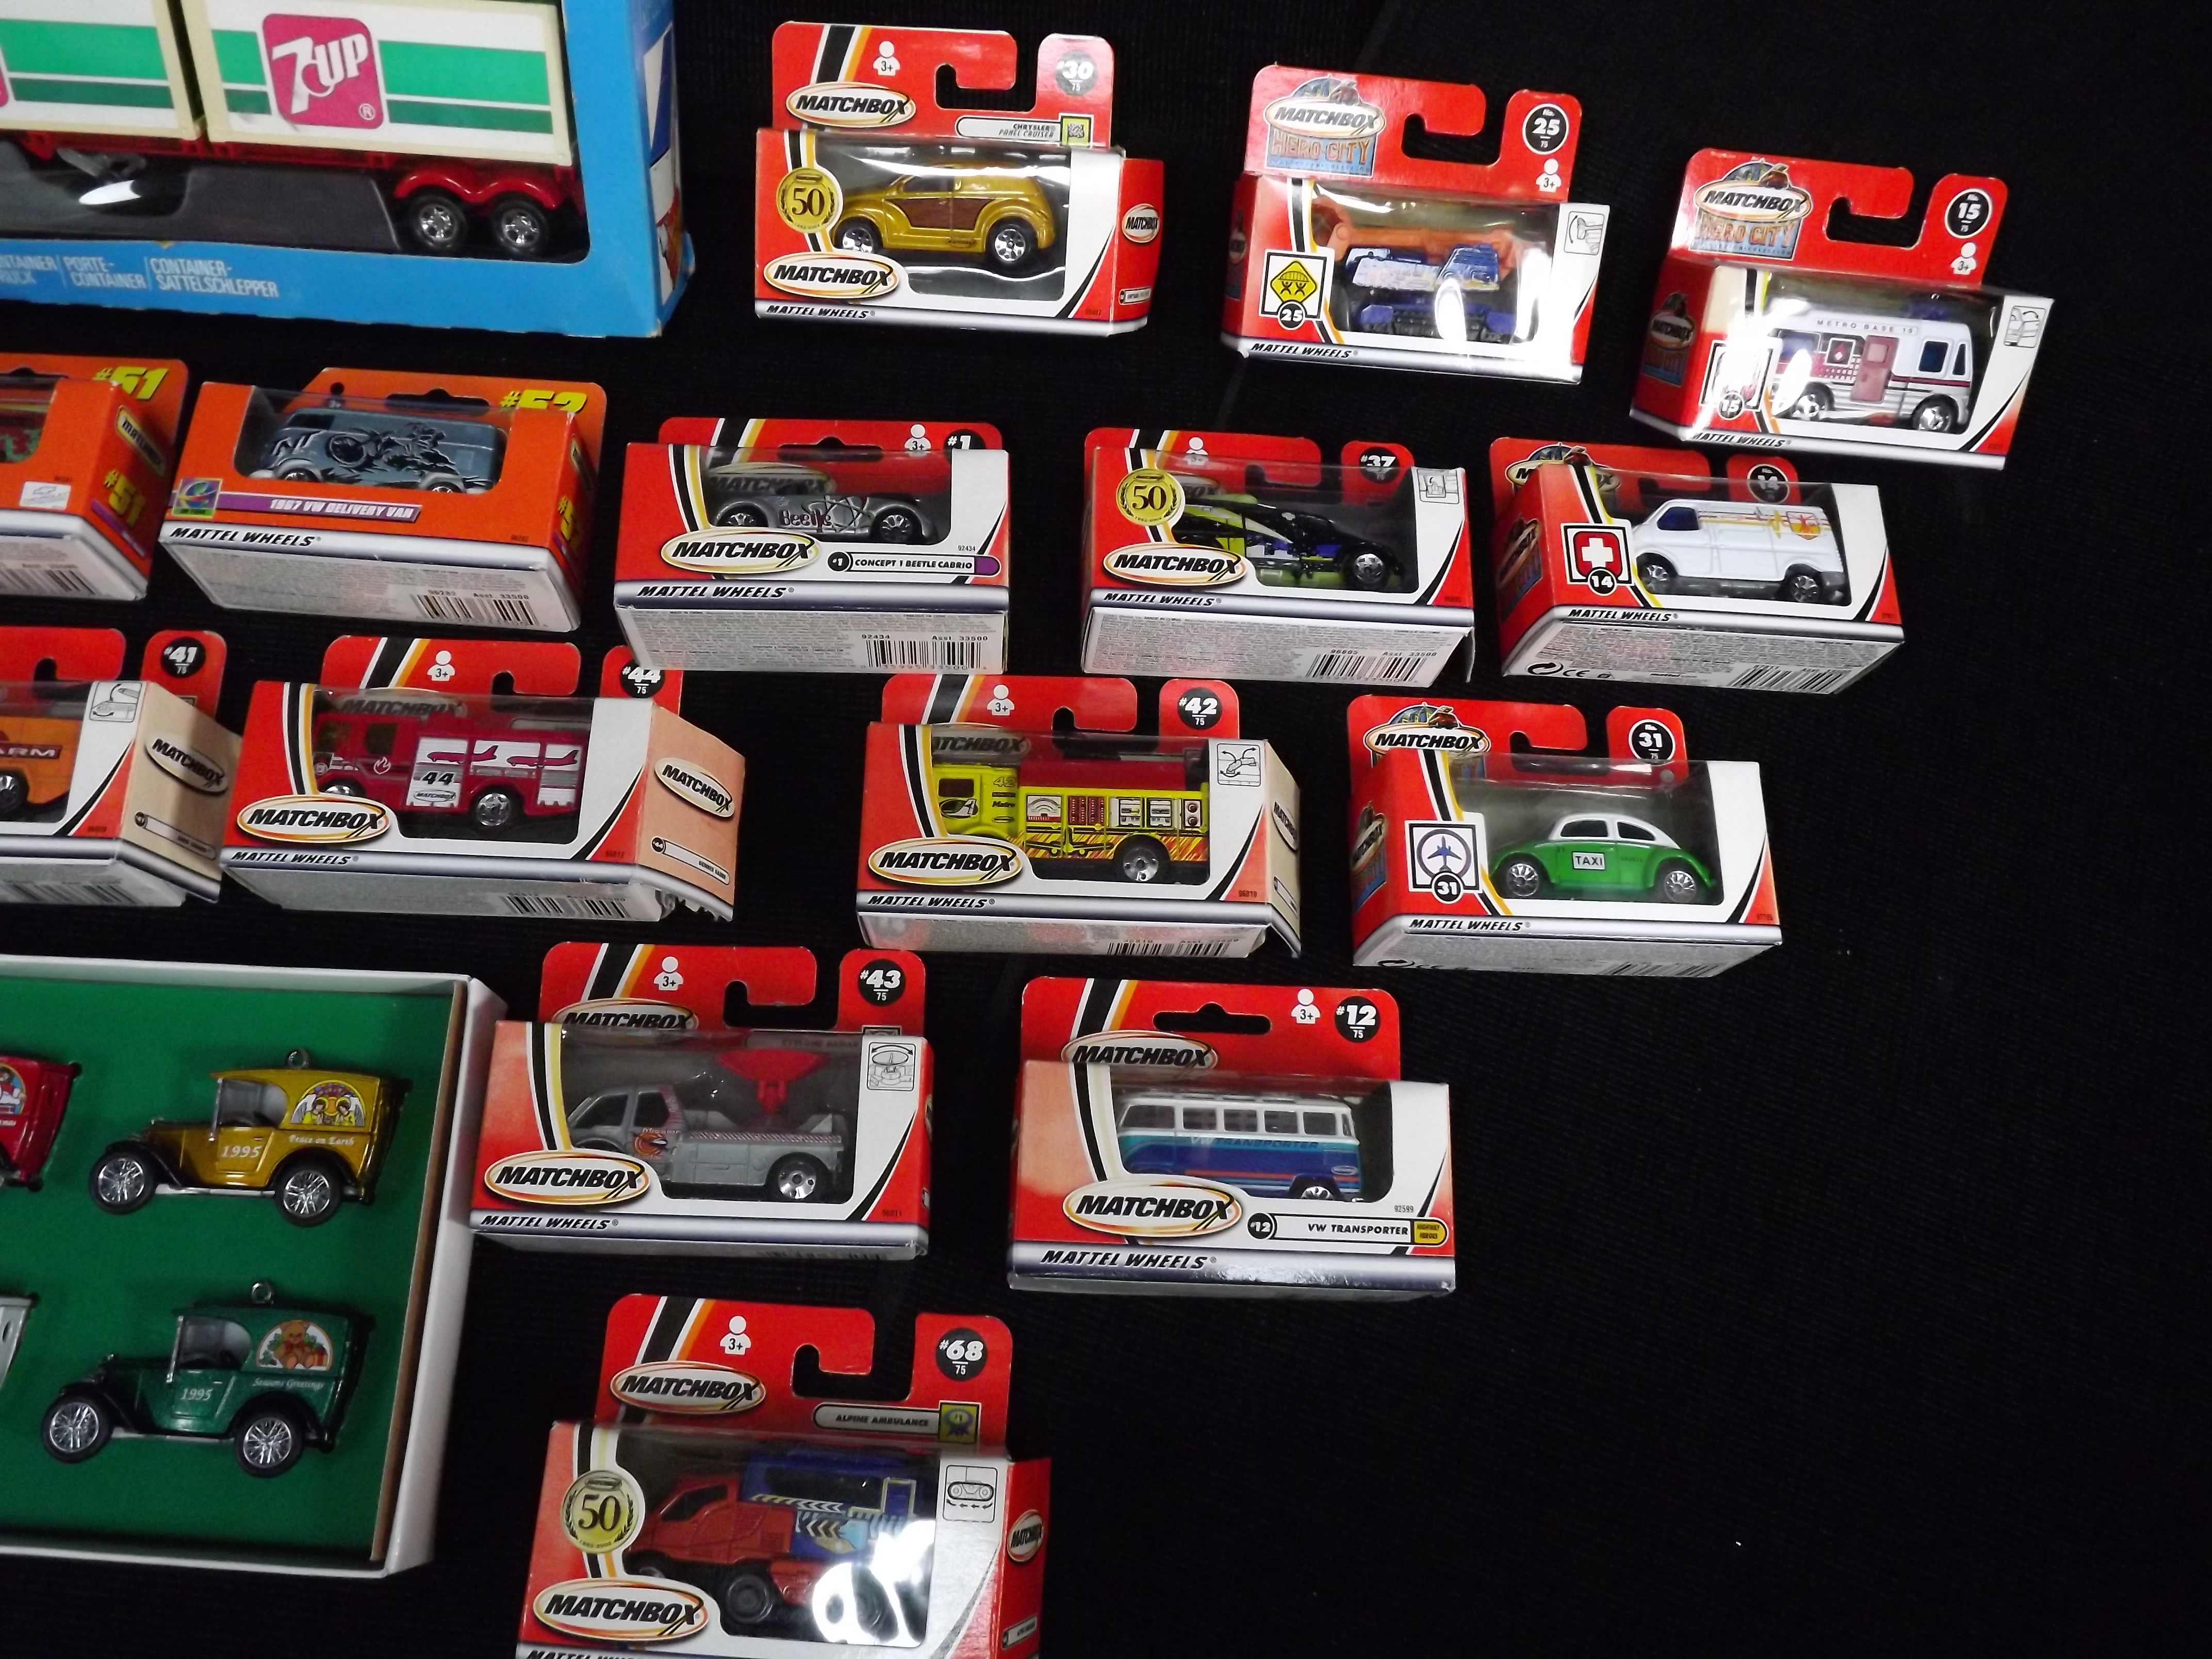 Matchbox Collection. K-17 Superkings 7UP Container Truck, 5 x Blue Check Box Delivery Vans with a - Image 4 of 4